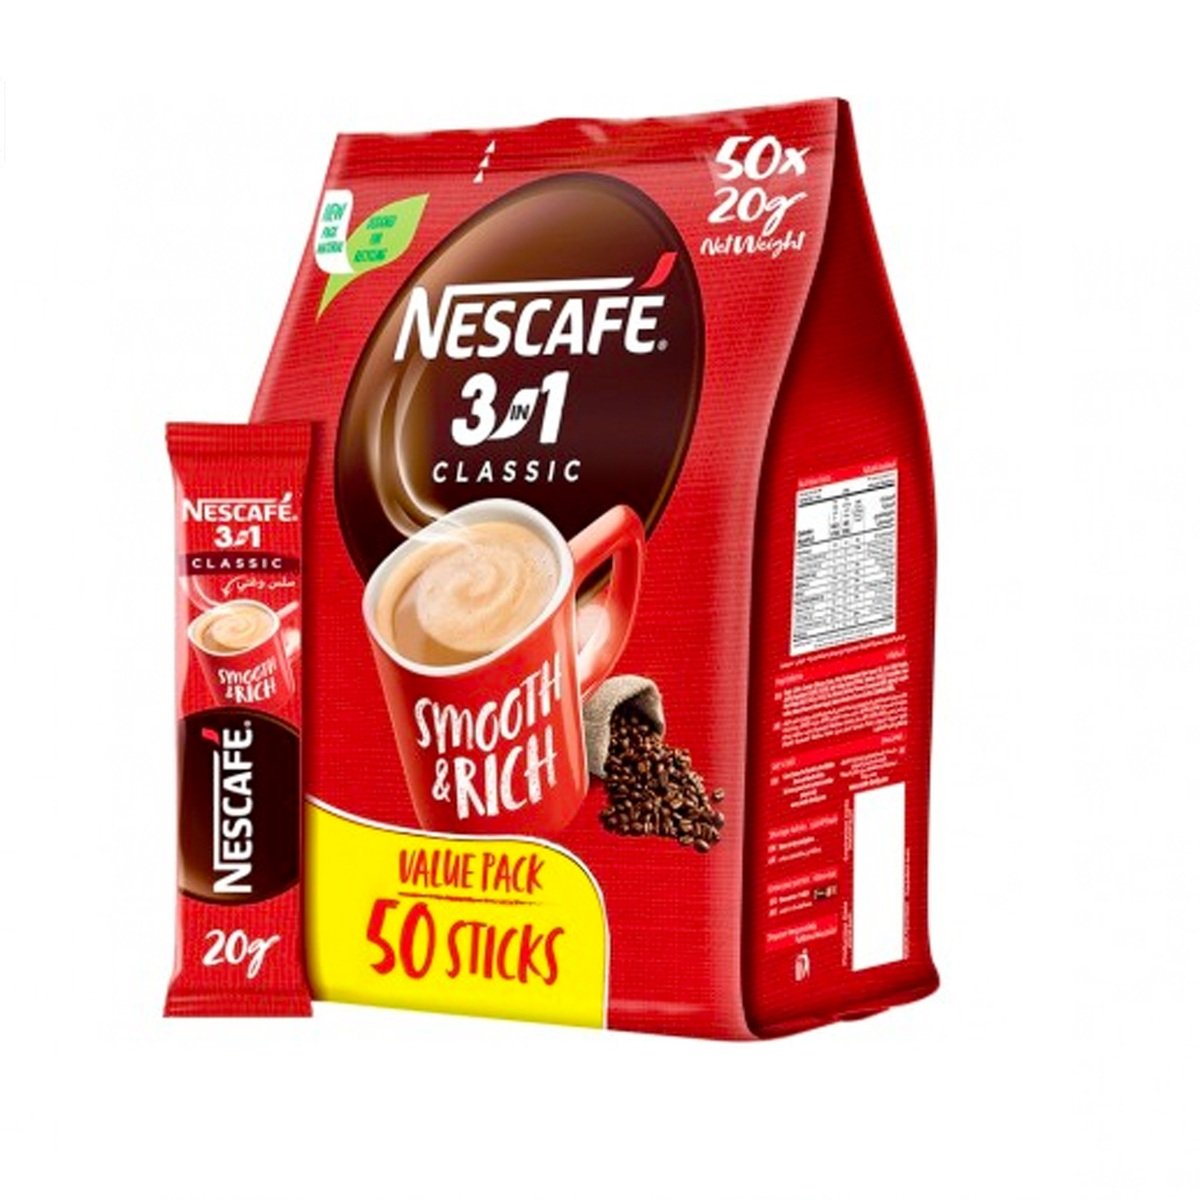 Nescafe Classic 3in1 Coffee Mix Value Pack 50 x 20 g